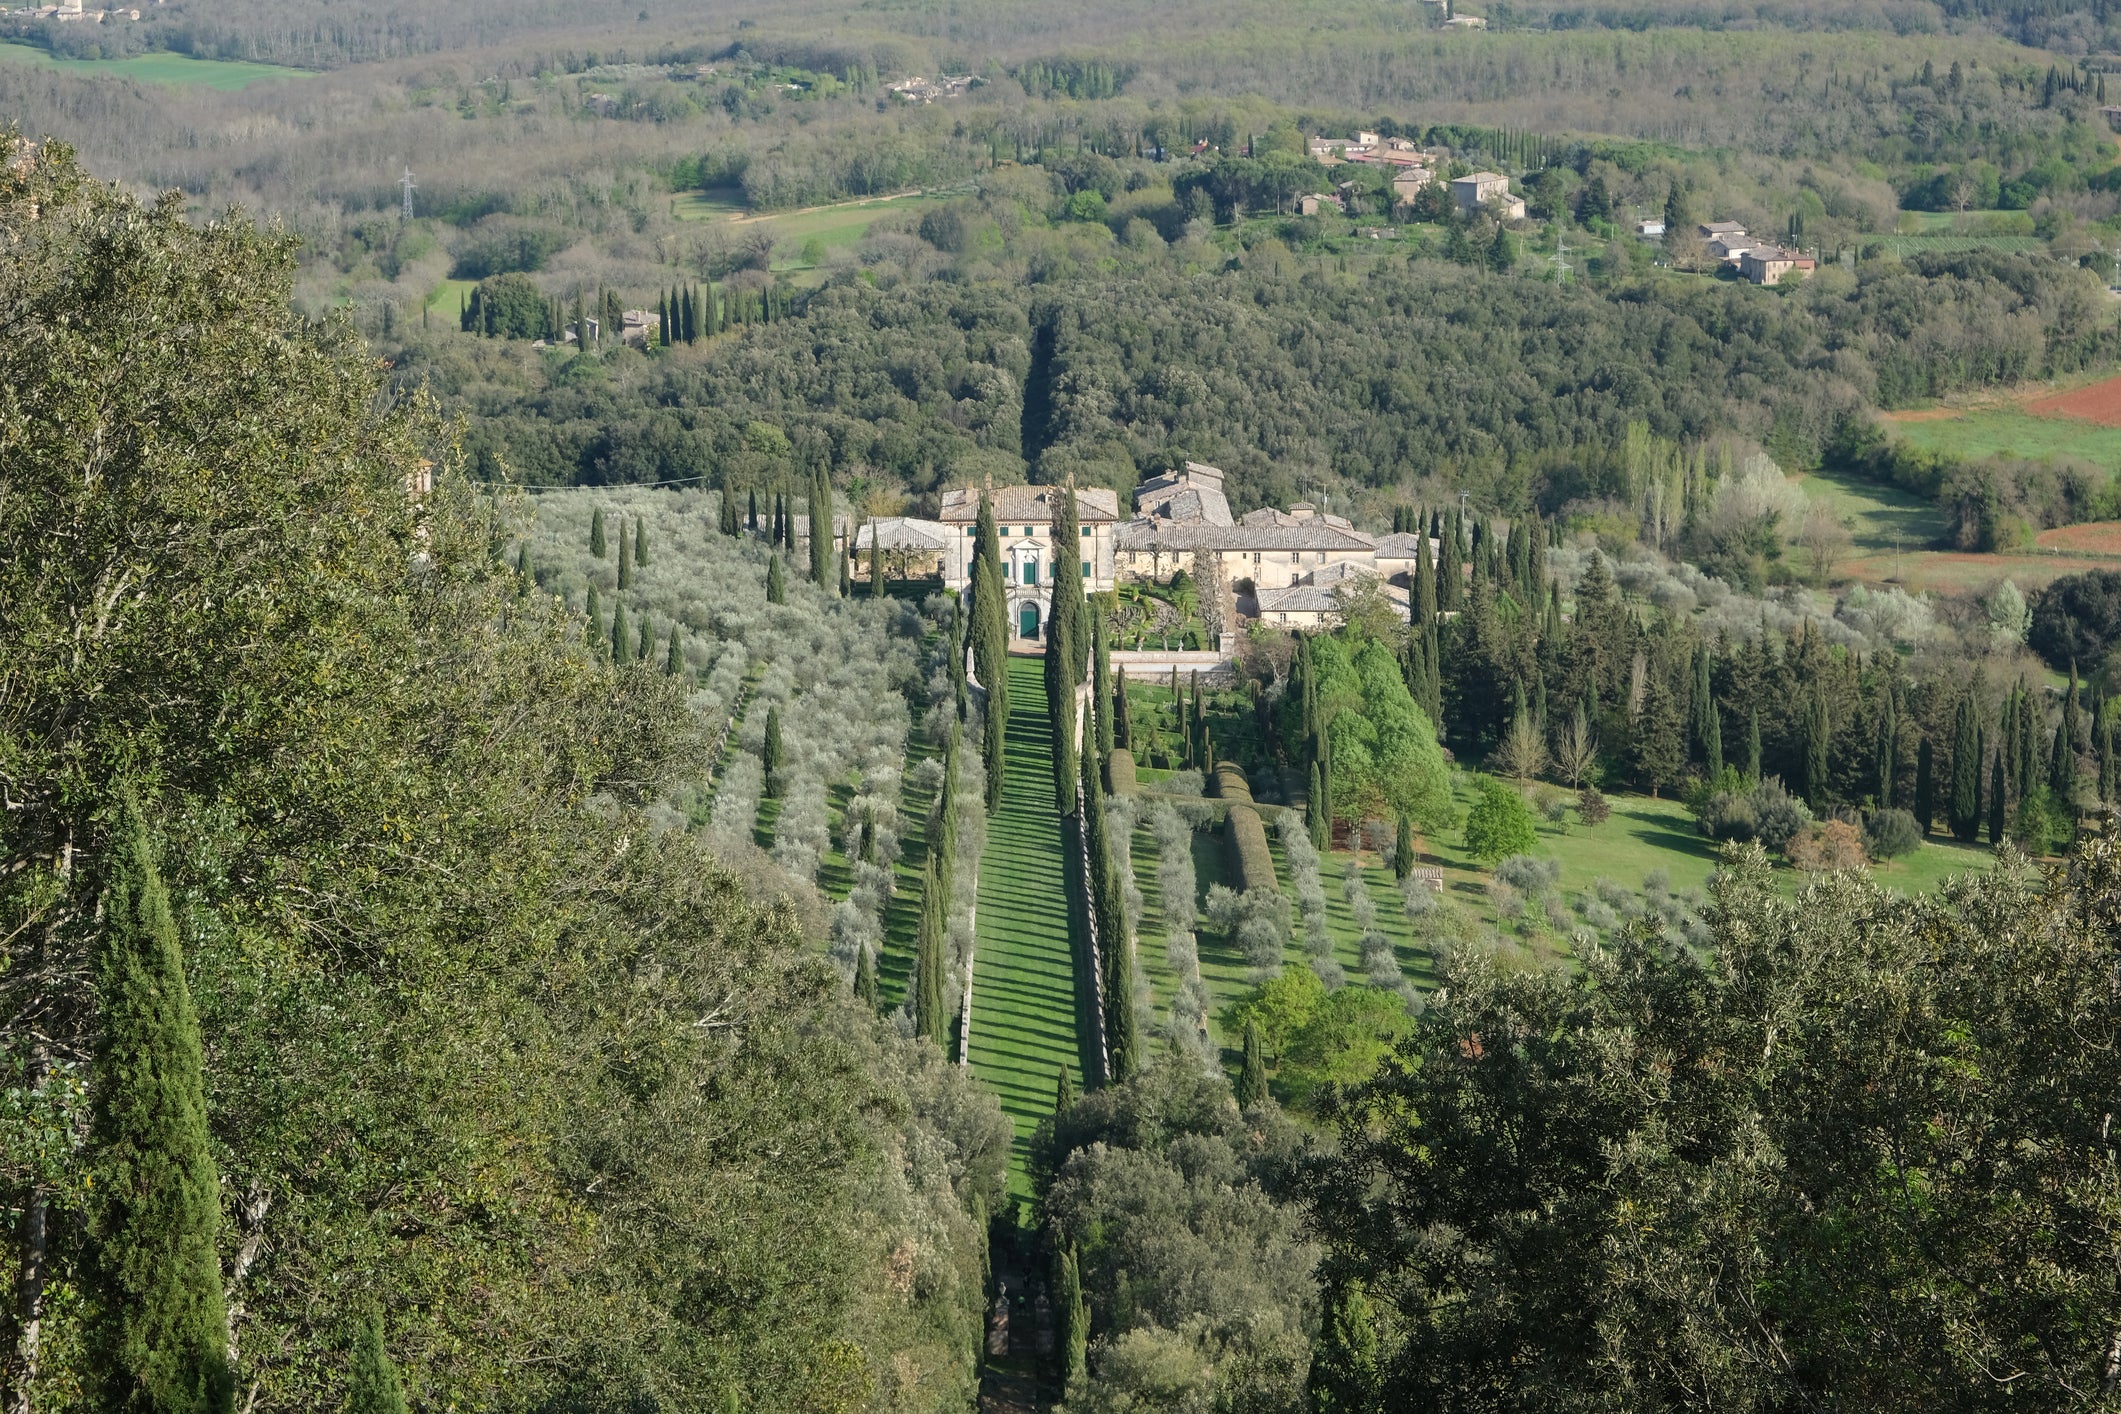 Villa Cetinale is an extraordinary base for exploring Tuscany – budget permitting